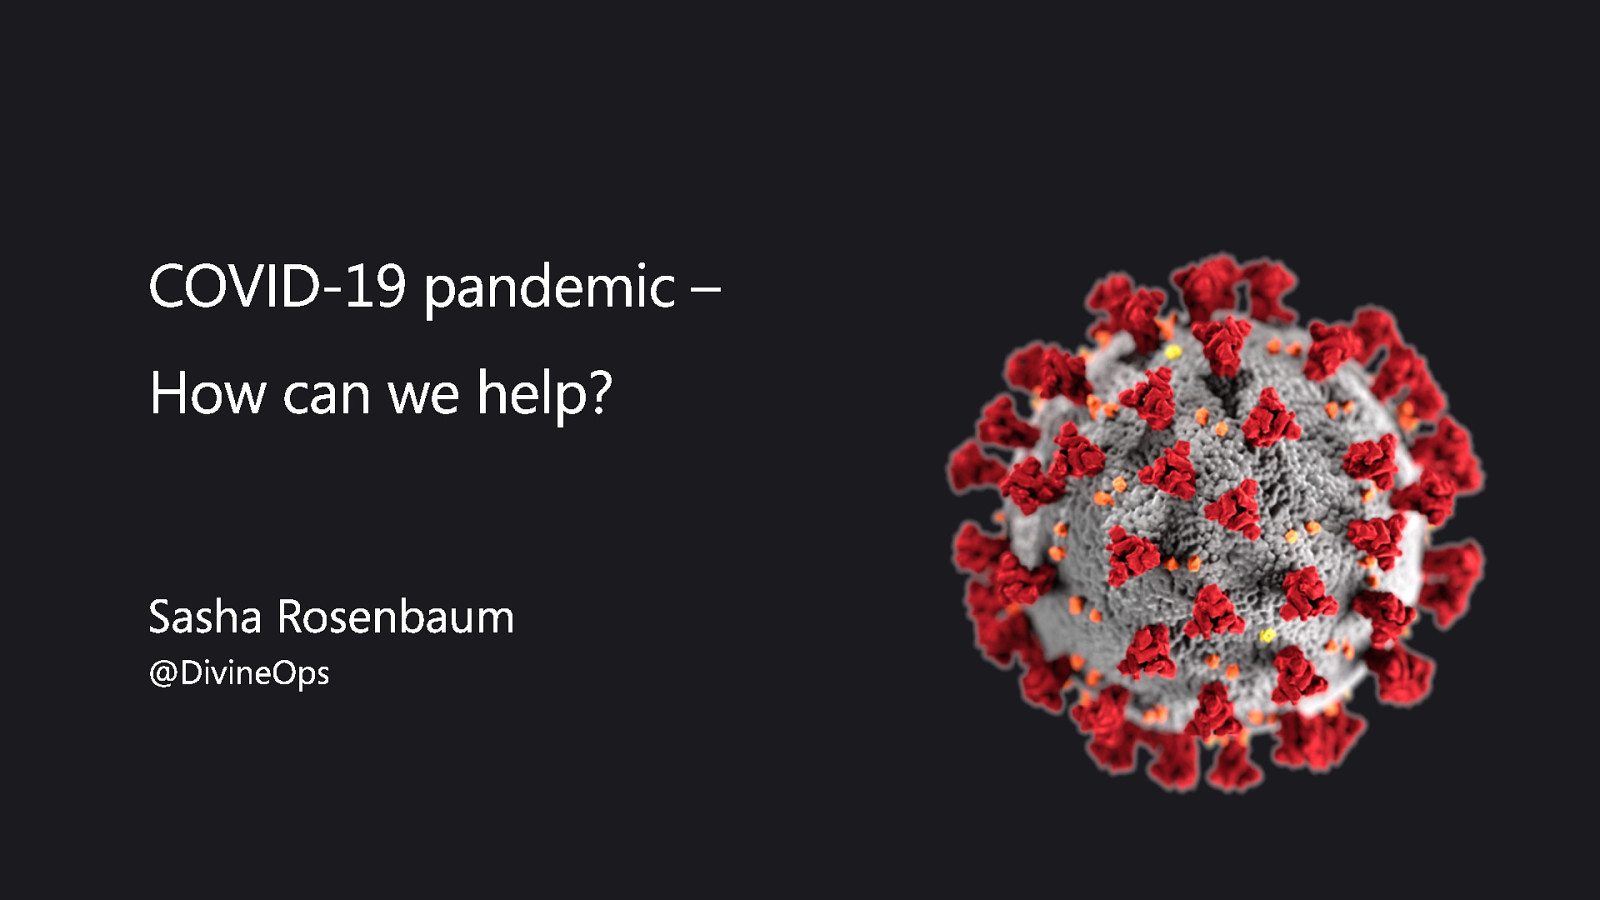 COVID-19 pandemic - how can we help?